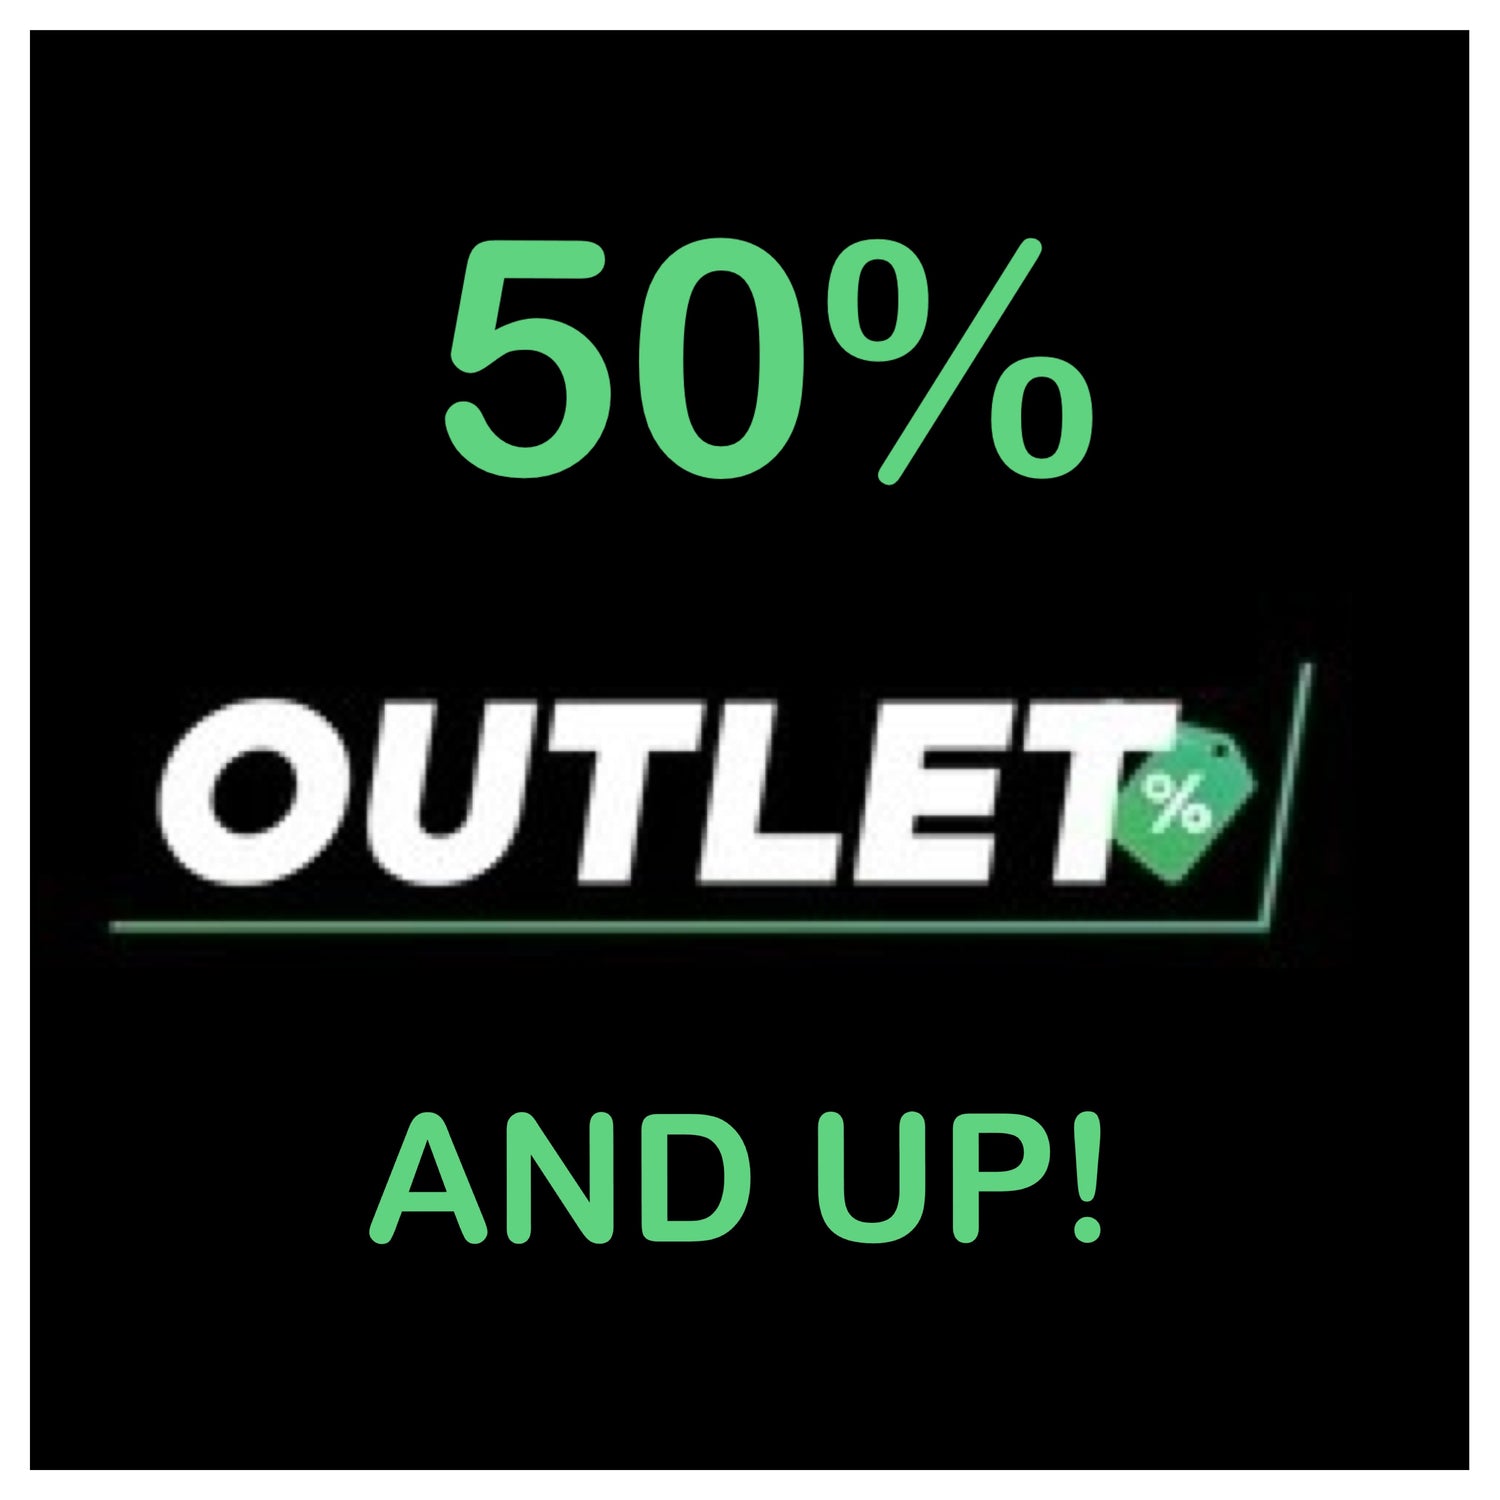 OUTLET! 50% AND UP!